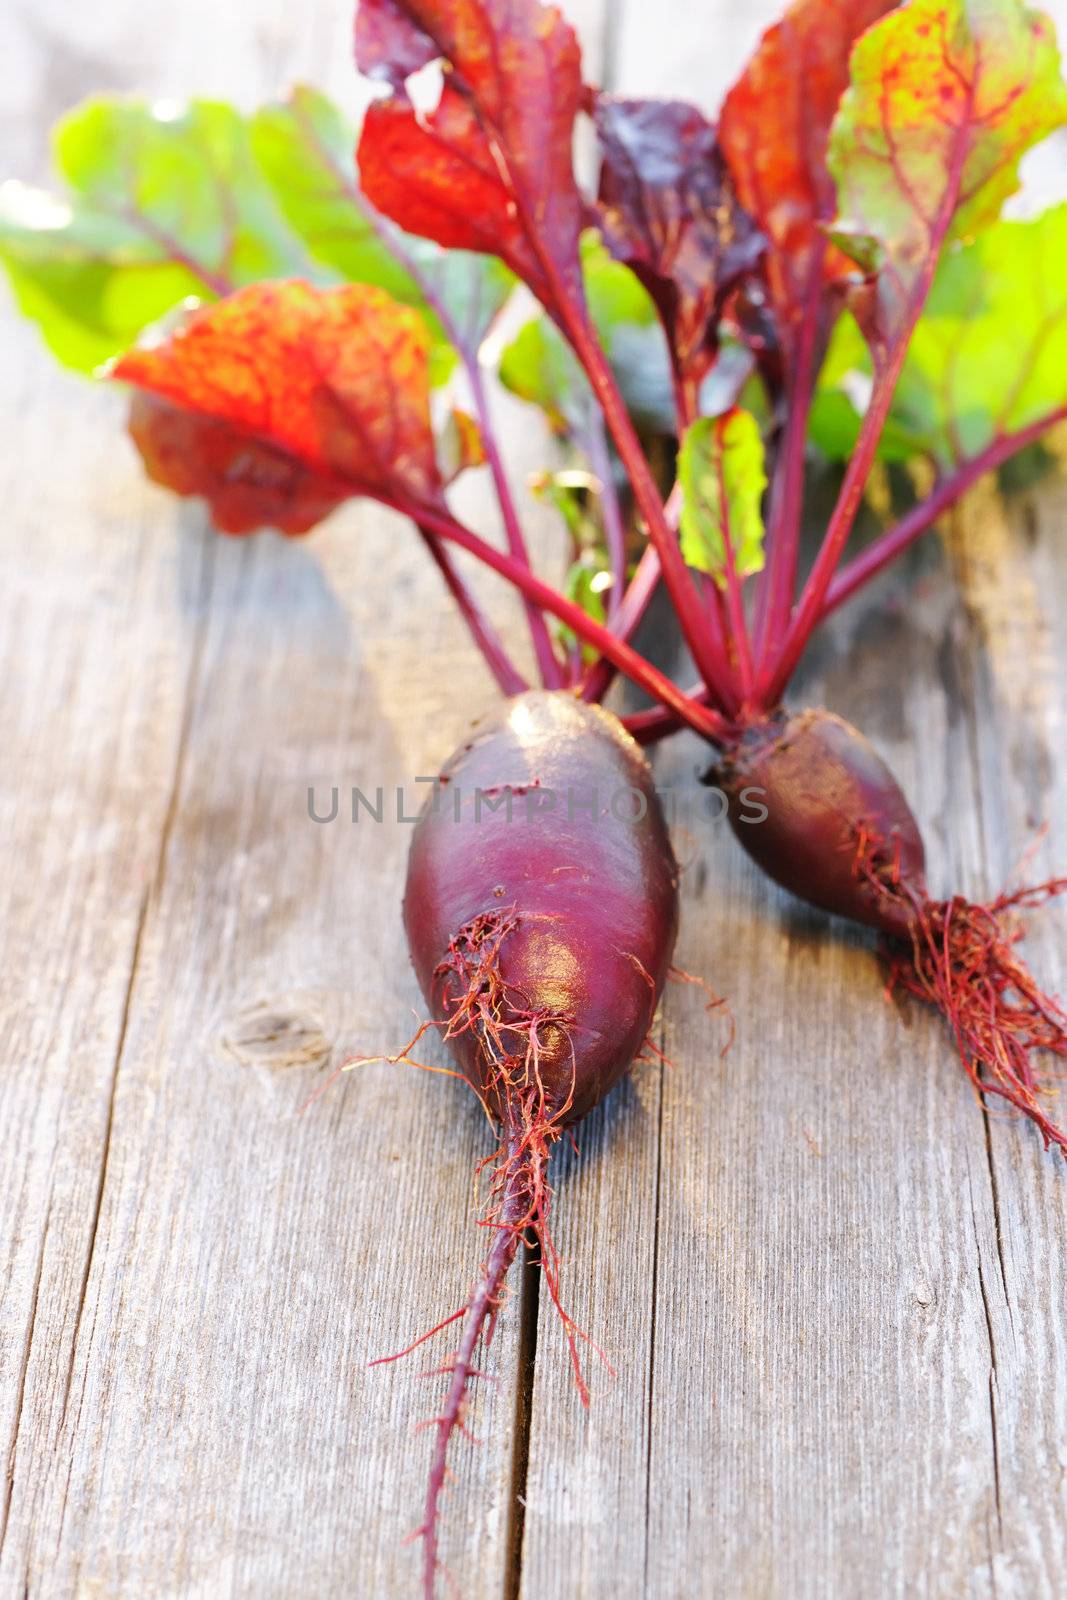 Beetroot with leafs on wooden table